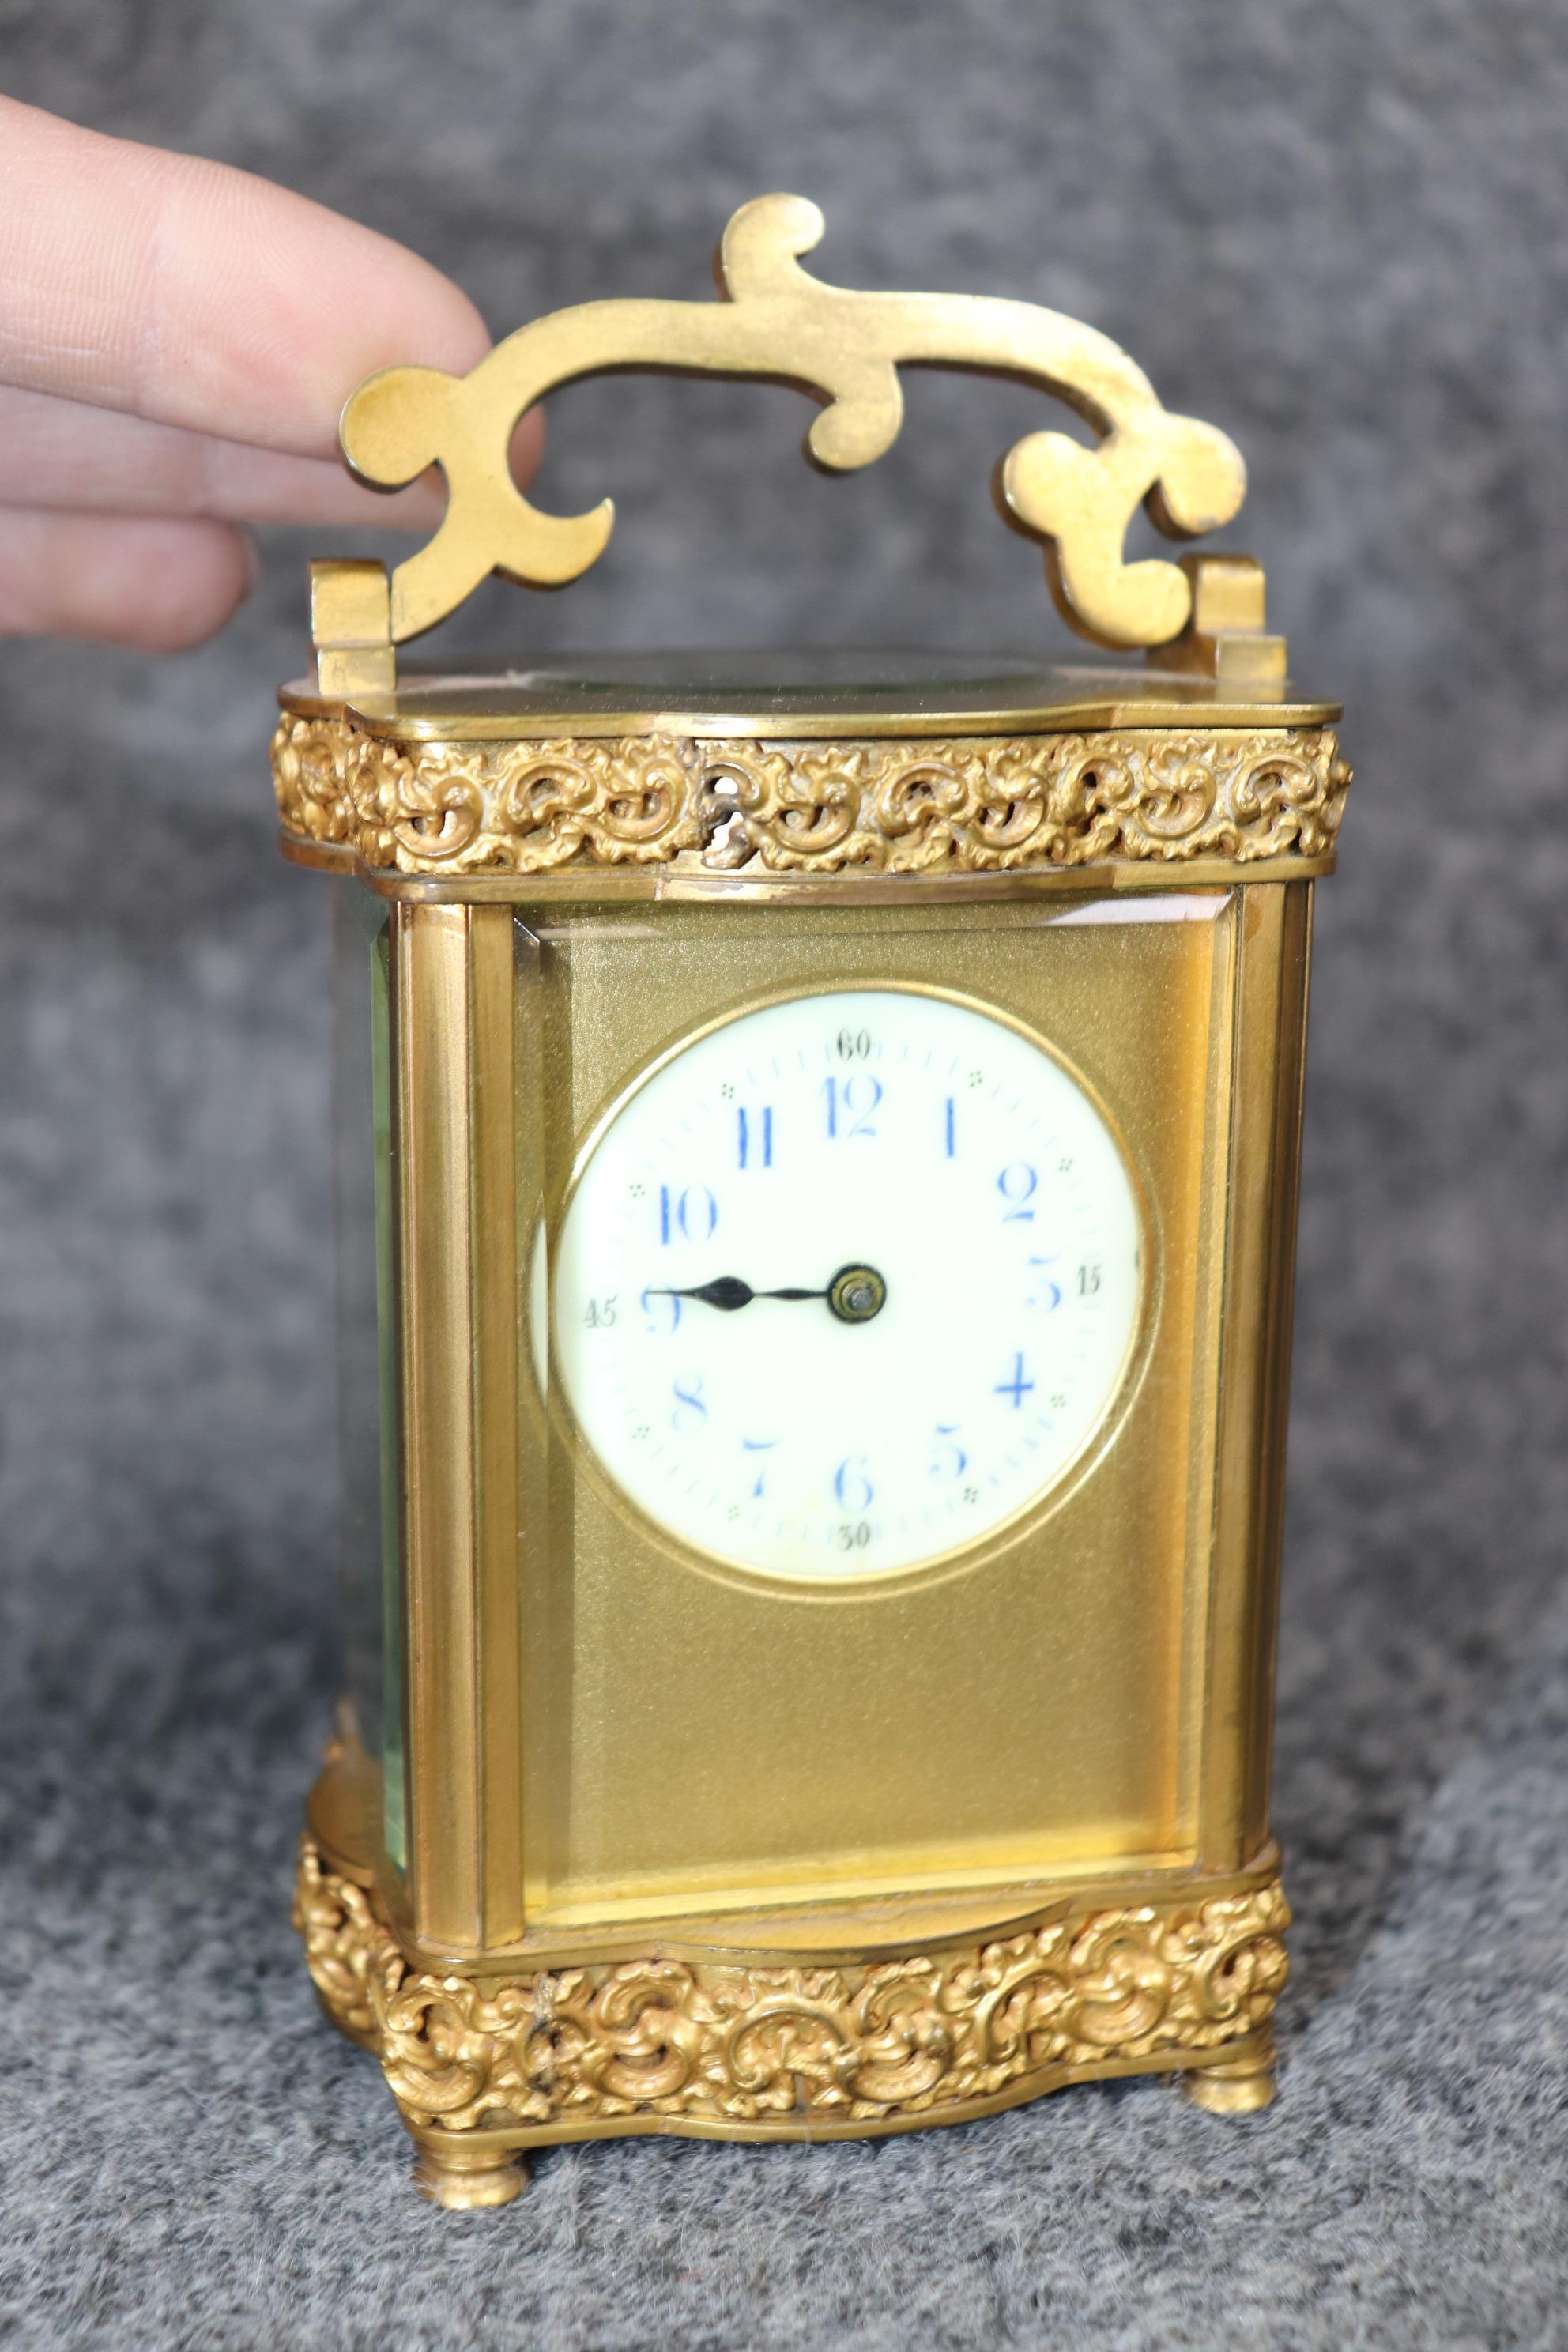 Dimensions - H: 6 1/4in W: 3 1/4in D: 2 1/2in 

This antique early 20th century French Louis XV style bronze ormolu carriage clock is made of the highest quality!  This will be perfect for your any office, entryway, living room, dining room,